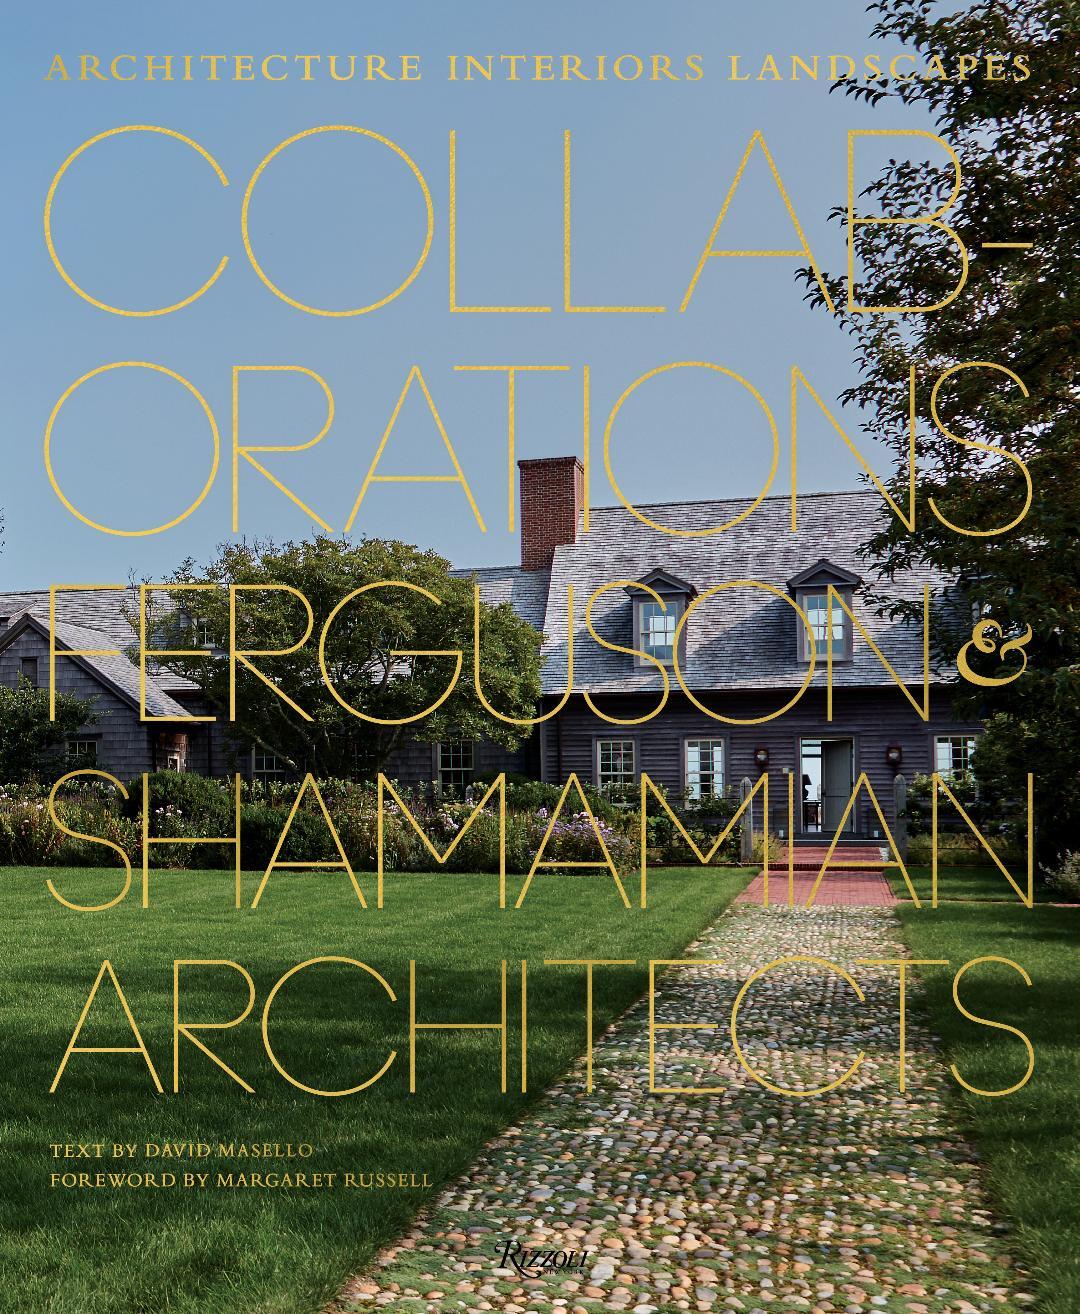 Ferguson and Shamamian Architects new book Collaborations